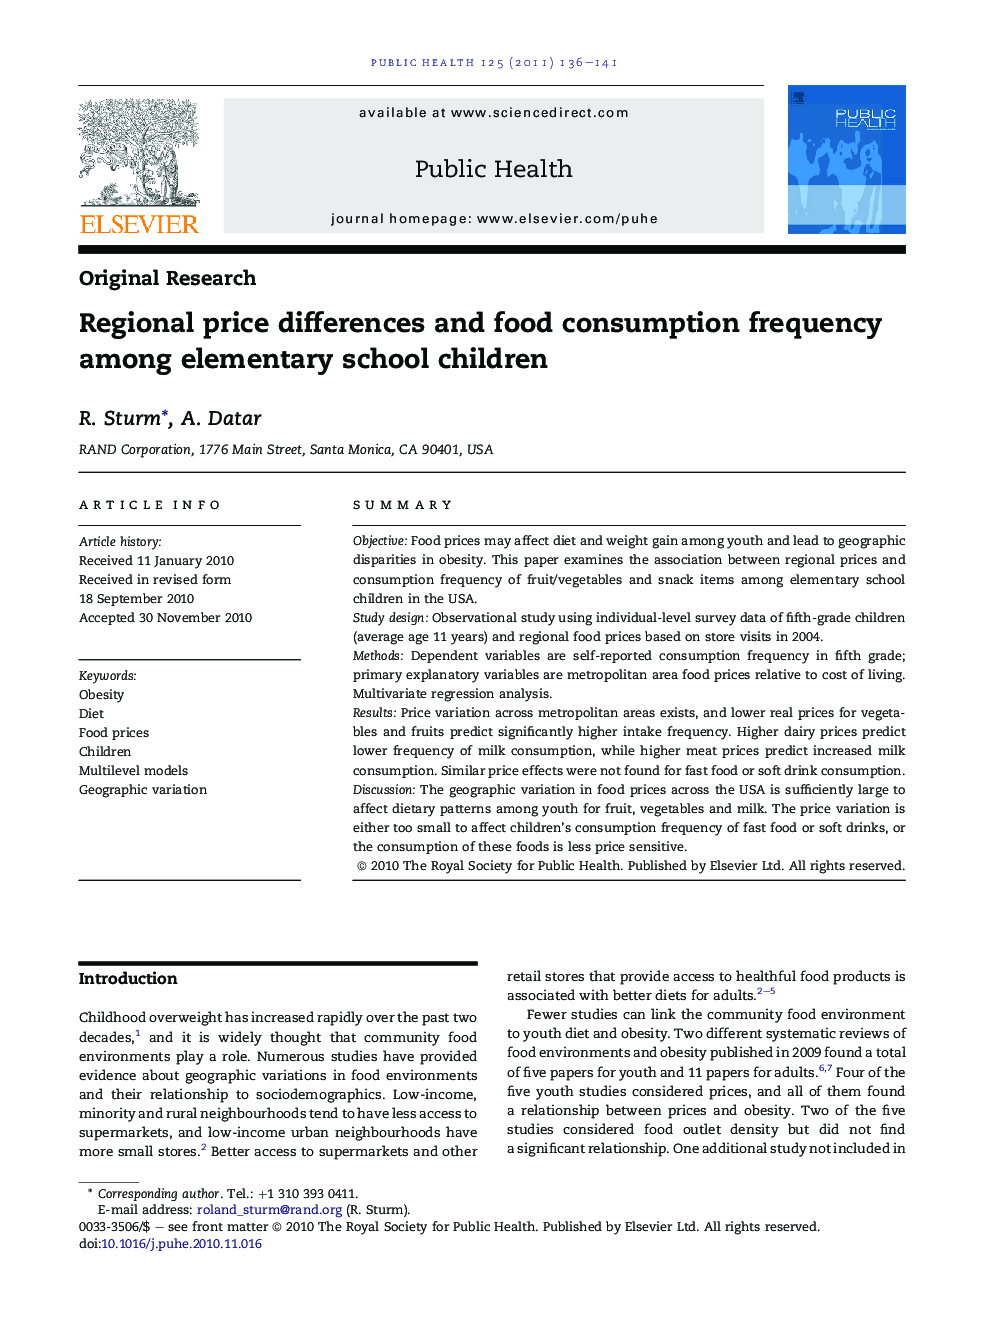 Regional price differences and food consumption frequency among elementary school children